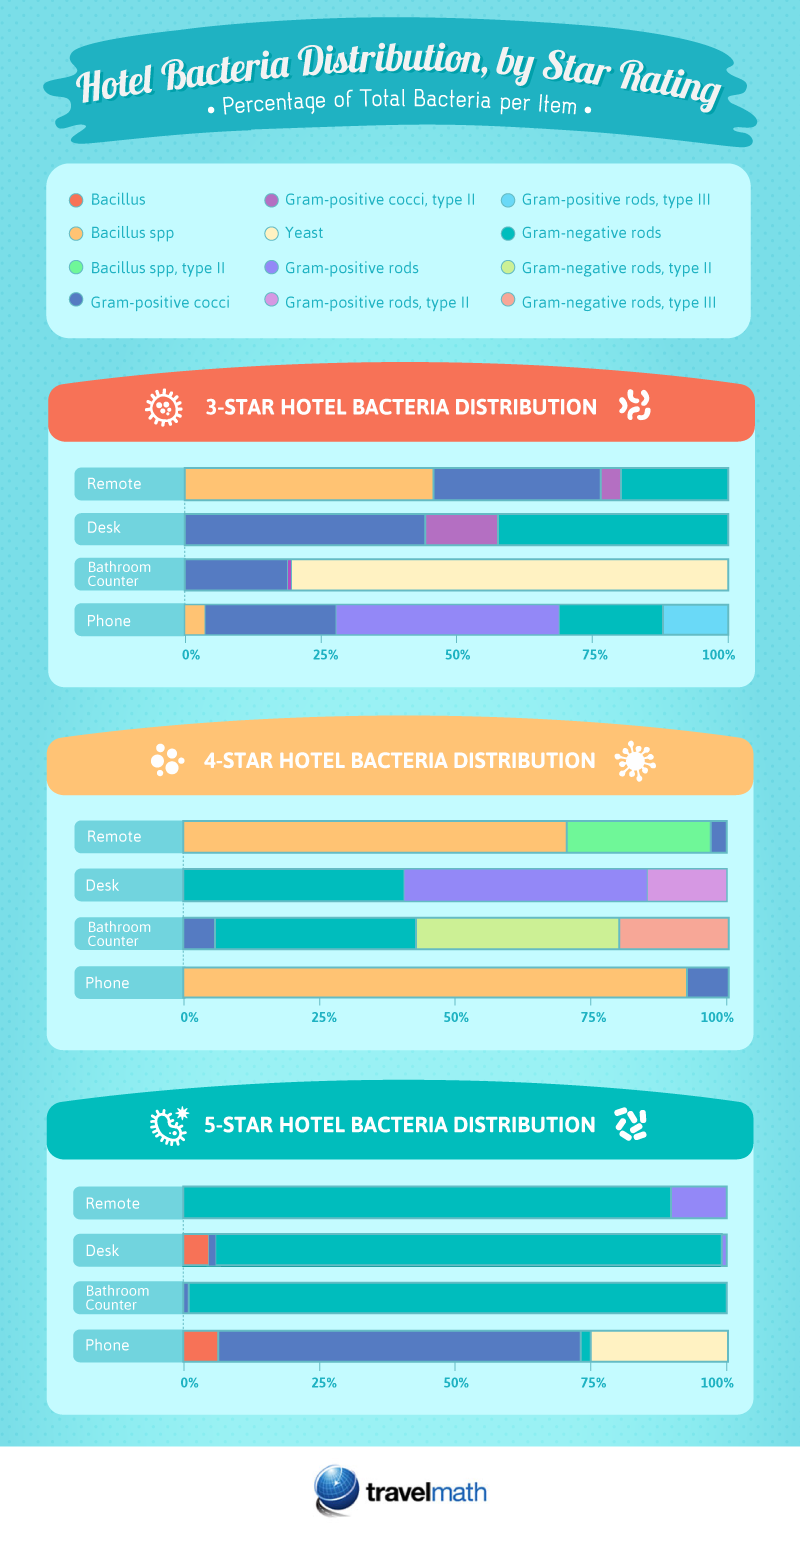 Hotel Bacteria Distribution by Star Rating